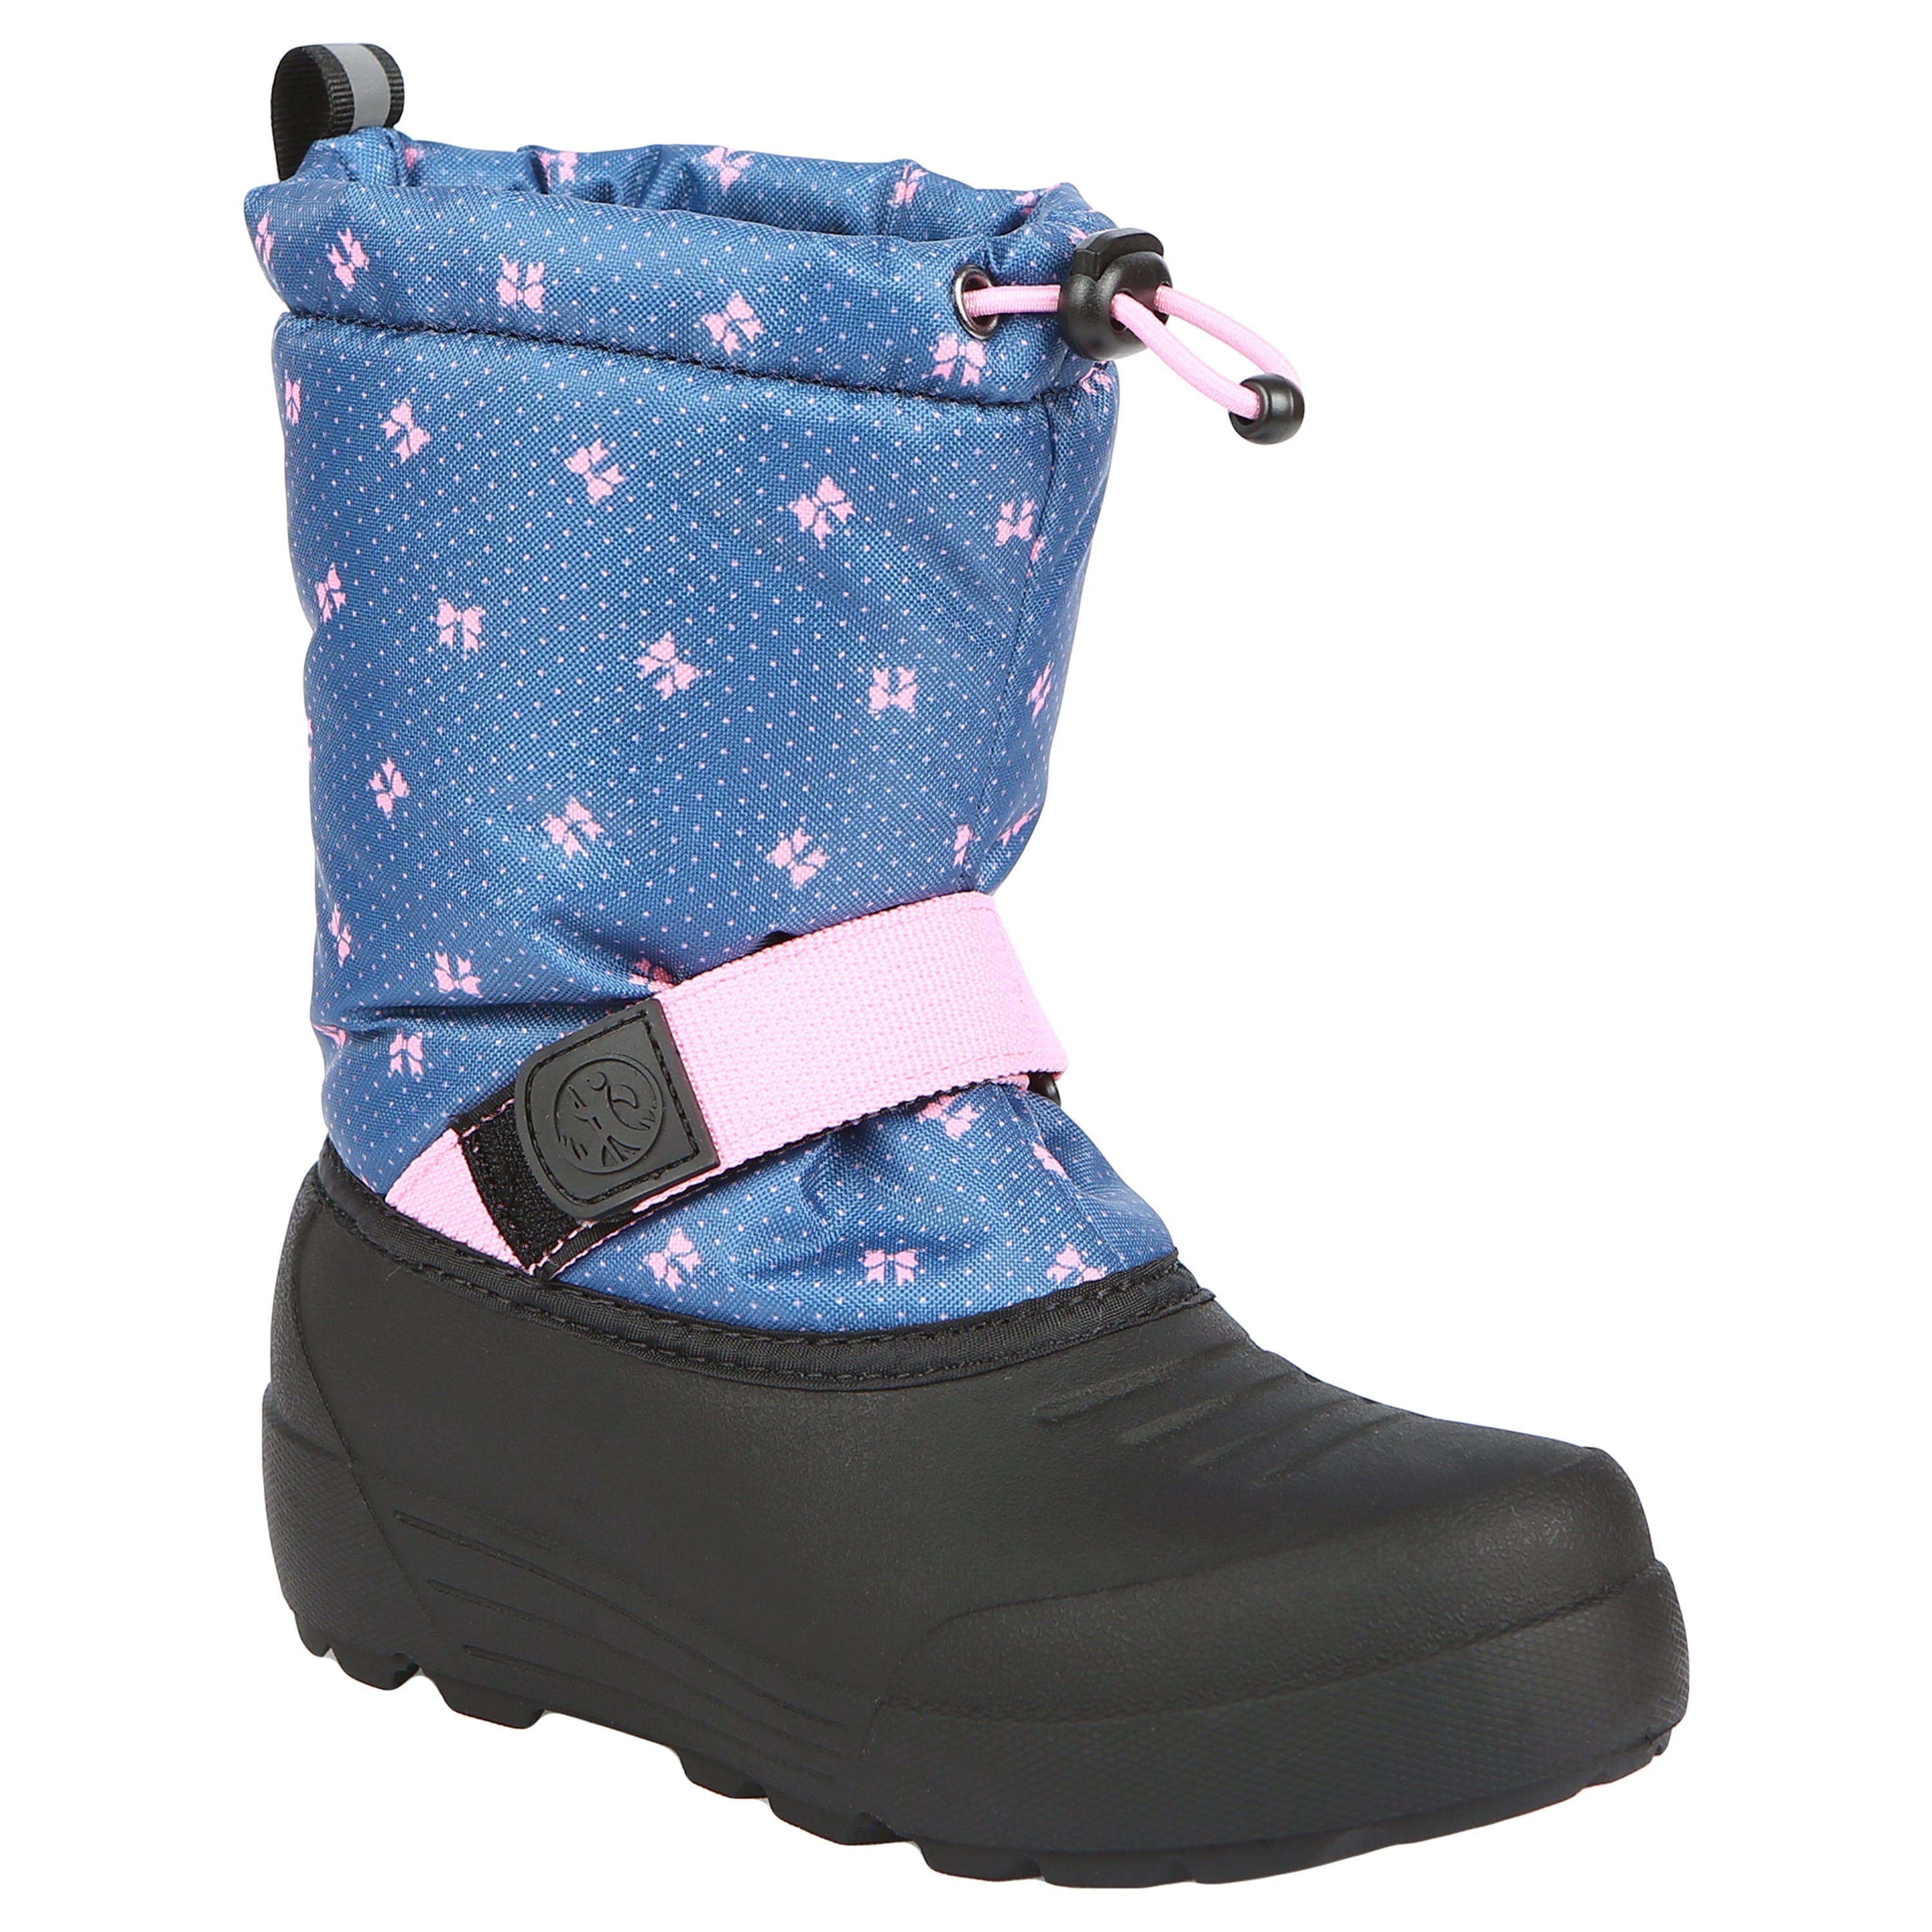 Kid's Frosty Insulated Winter Snow Boot - Northside USA